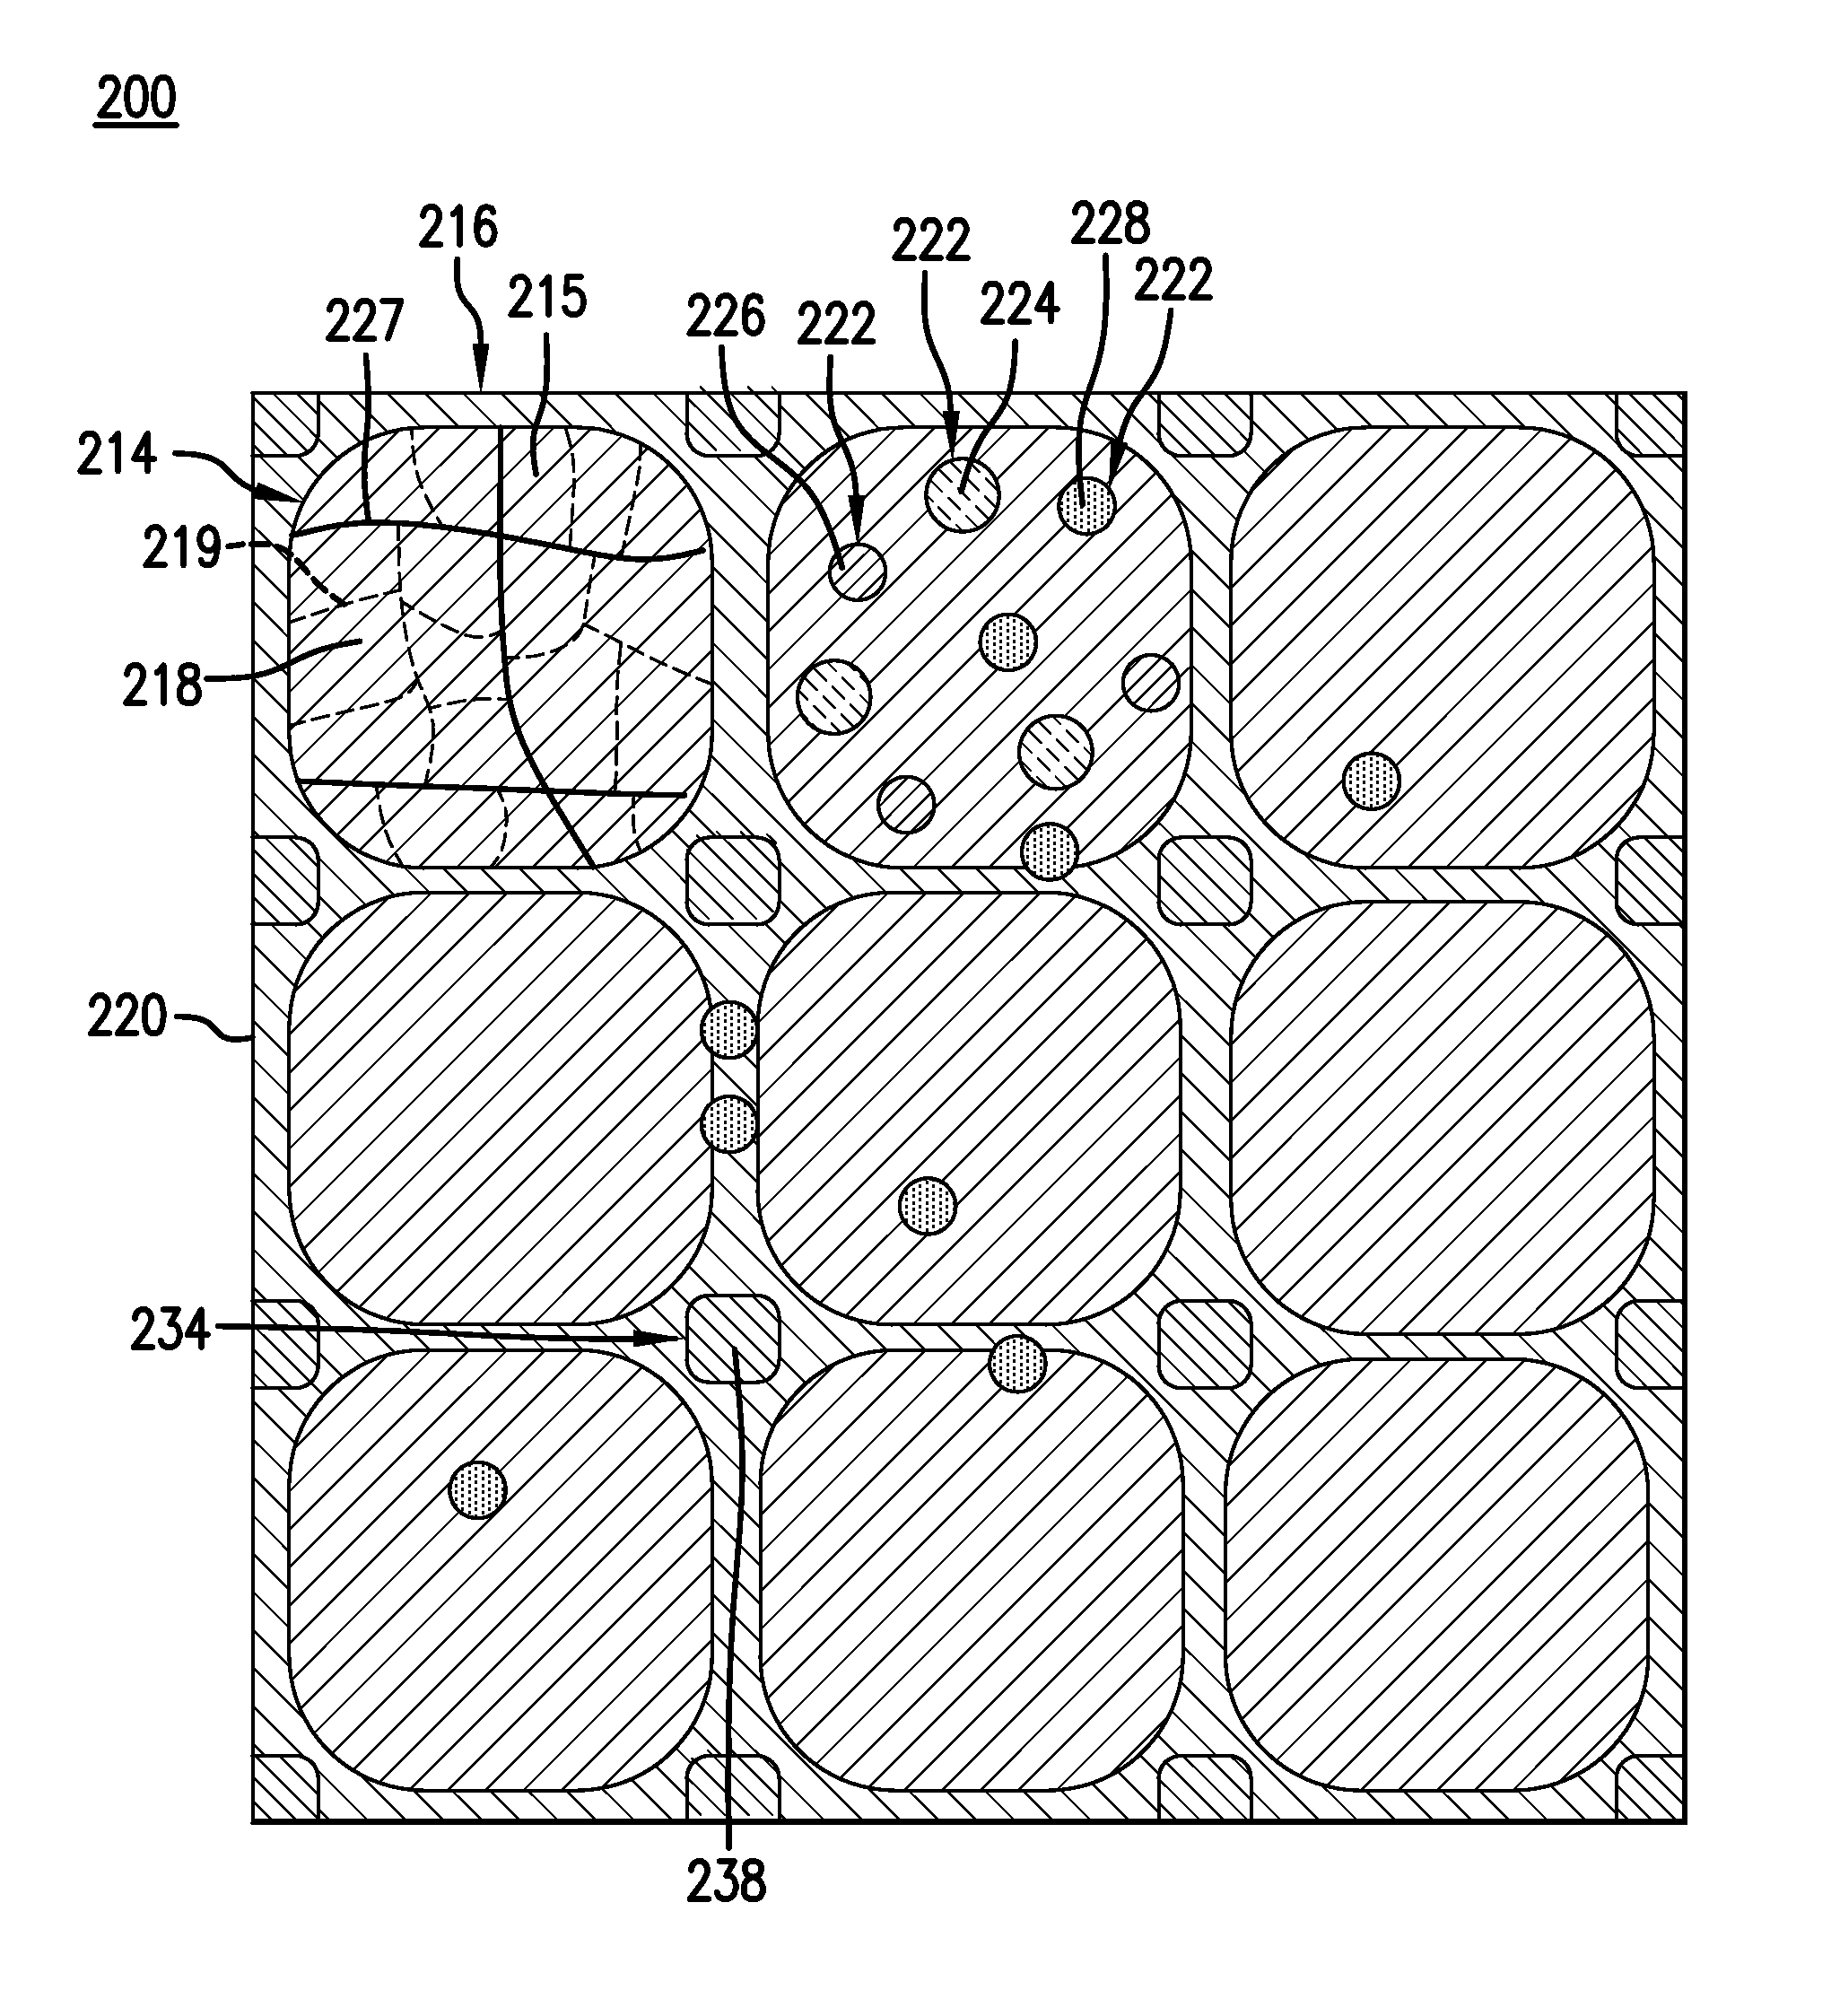 Biodegradable metallic medical implants, method for preparing and use thereof